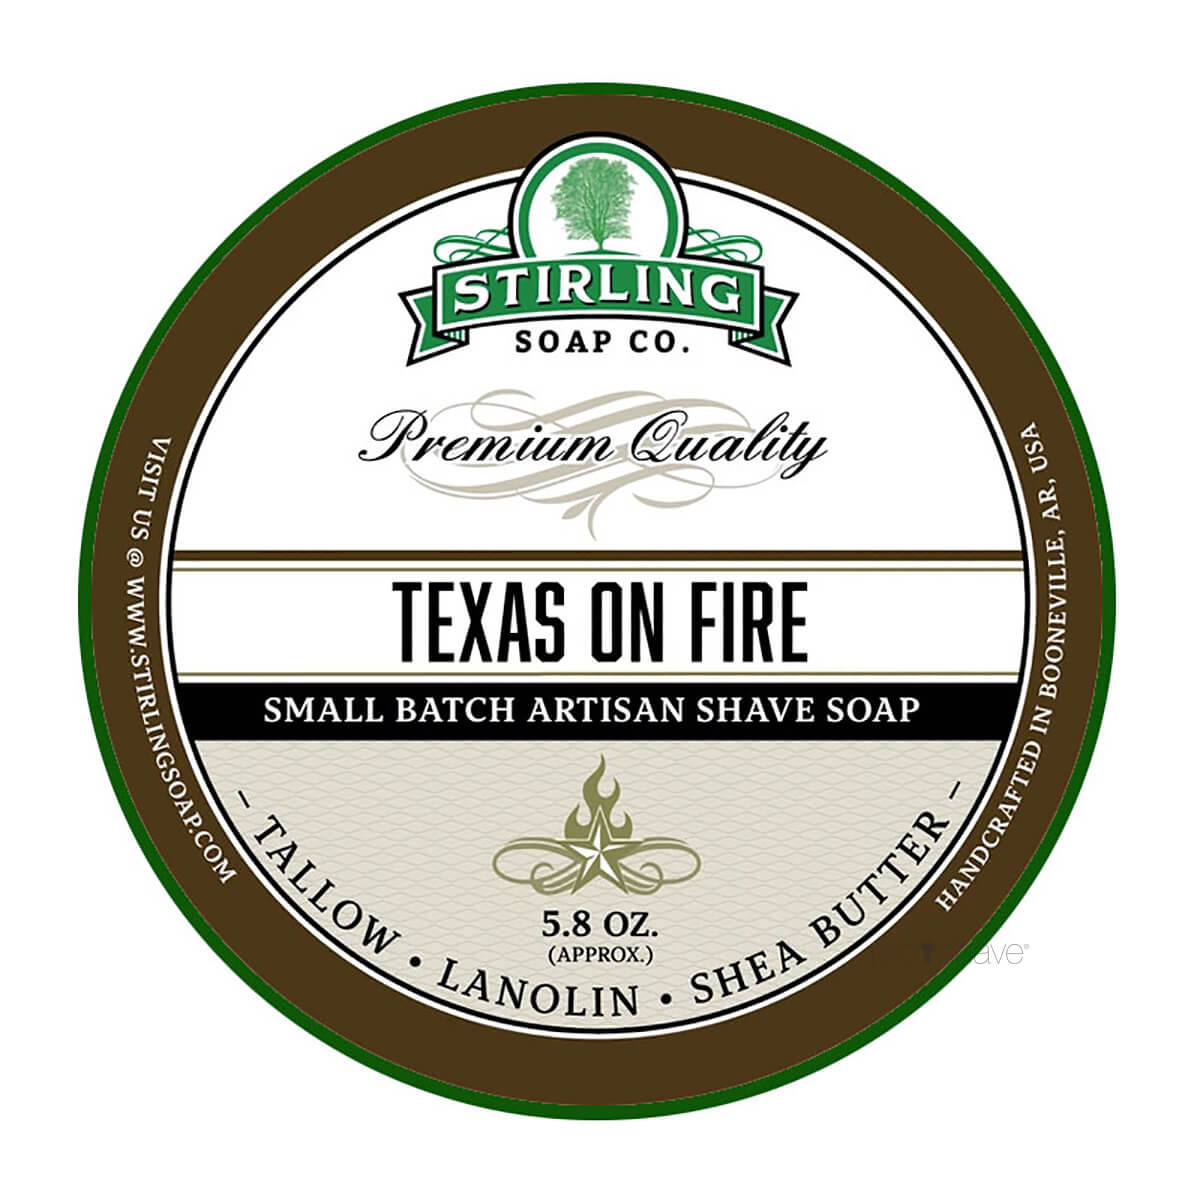 Stirling Soap Co. Barbersæbe, Texas on Fire, 170 ml.